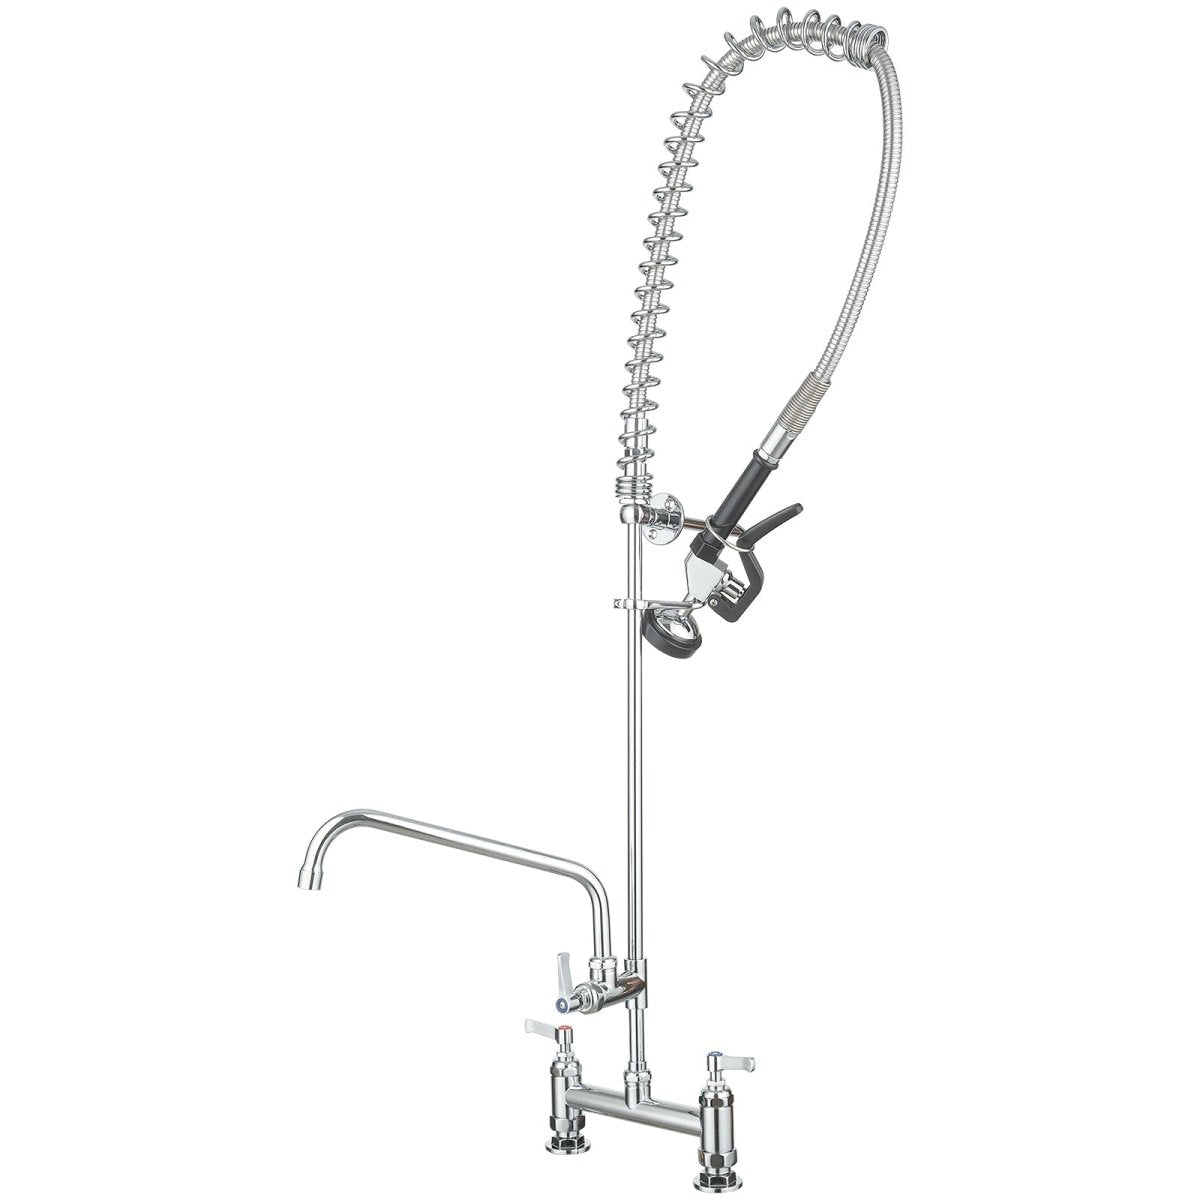 Pull Down 2-Handle Wall Mount Kitchen Faucet Polished Chrome - buyfaucet.com